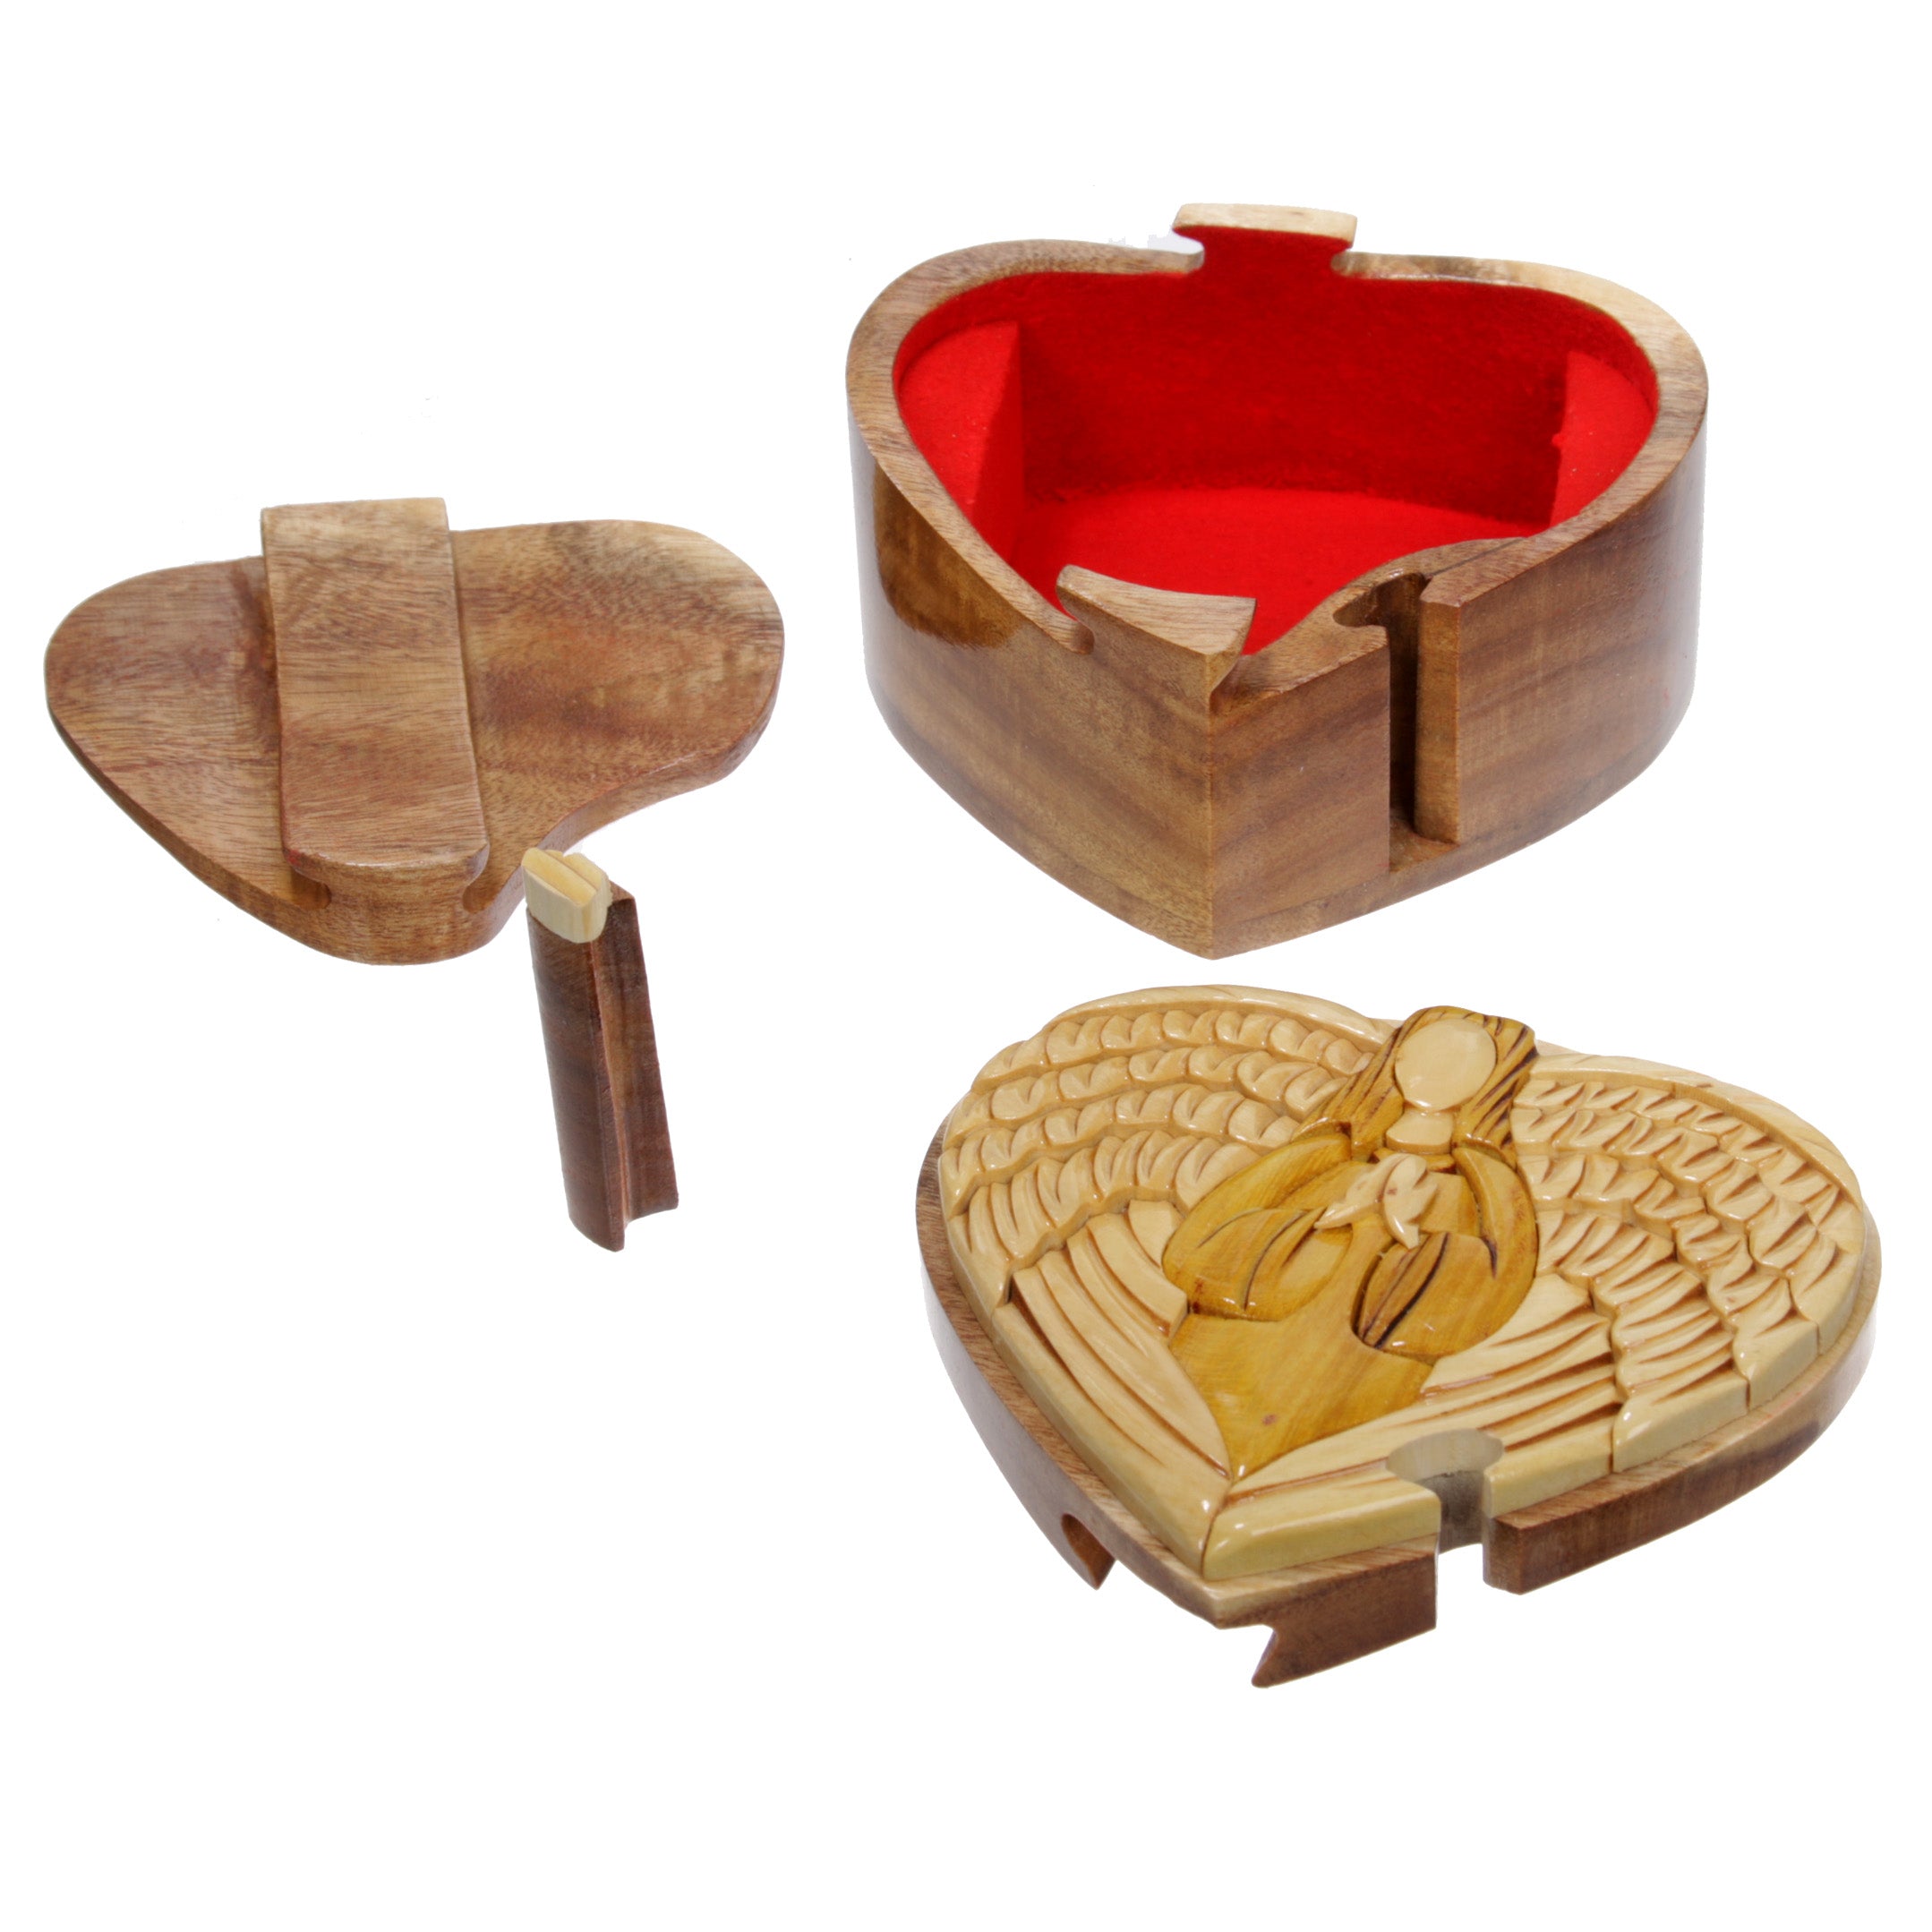 Handcrafted Wooden Heart/Art Shape Secret Jewelry Puzzle Box - Virgin Mary